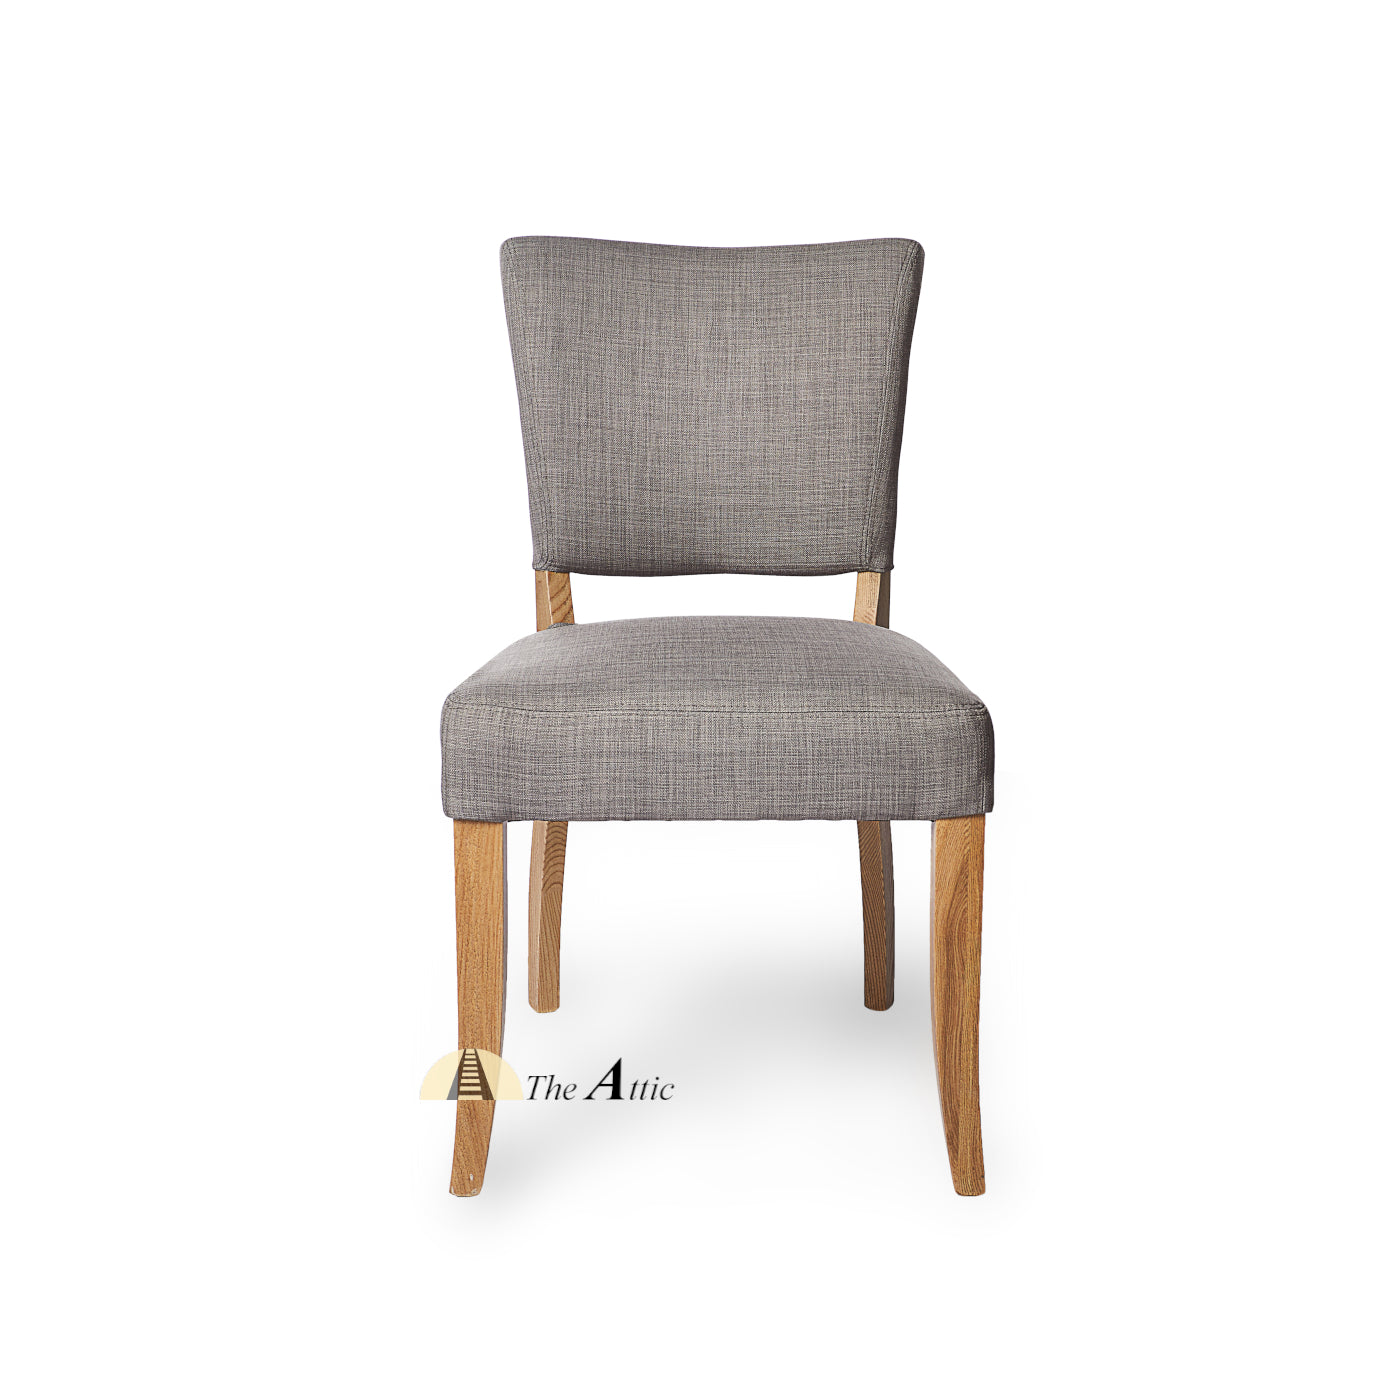 Diana Upholstered Dining Chair - The Attic Dubai